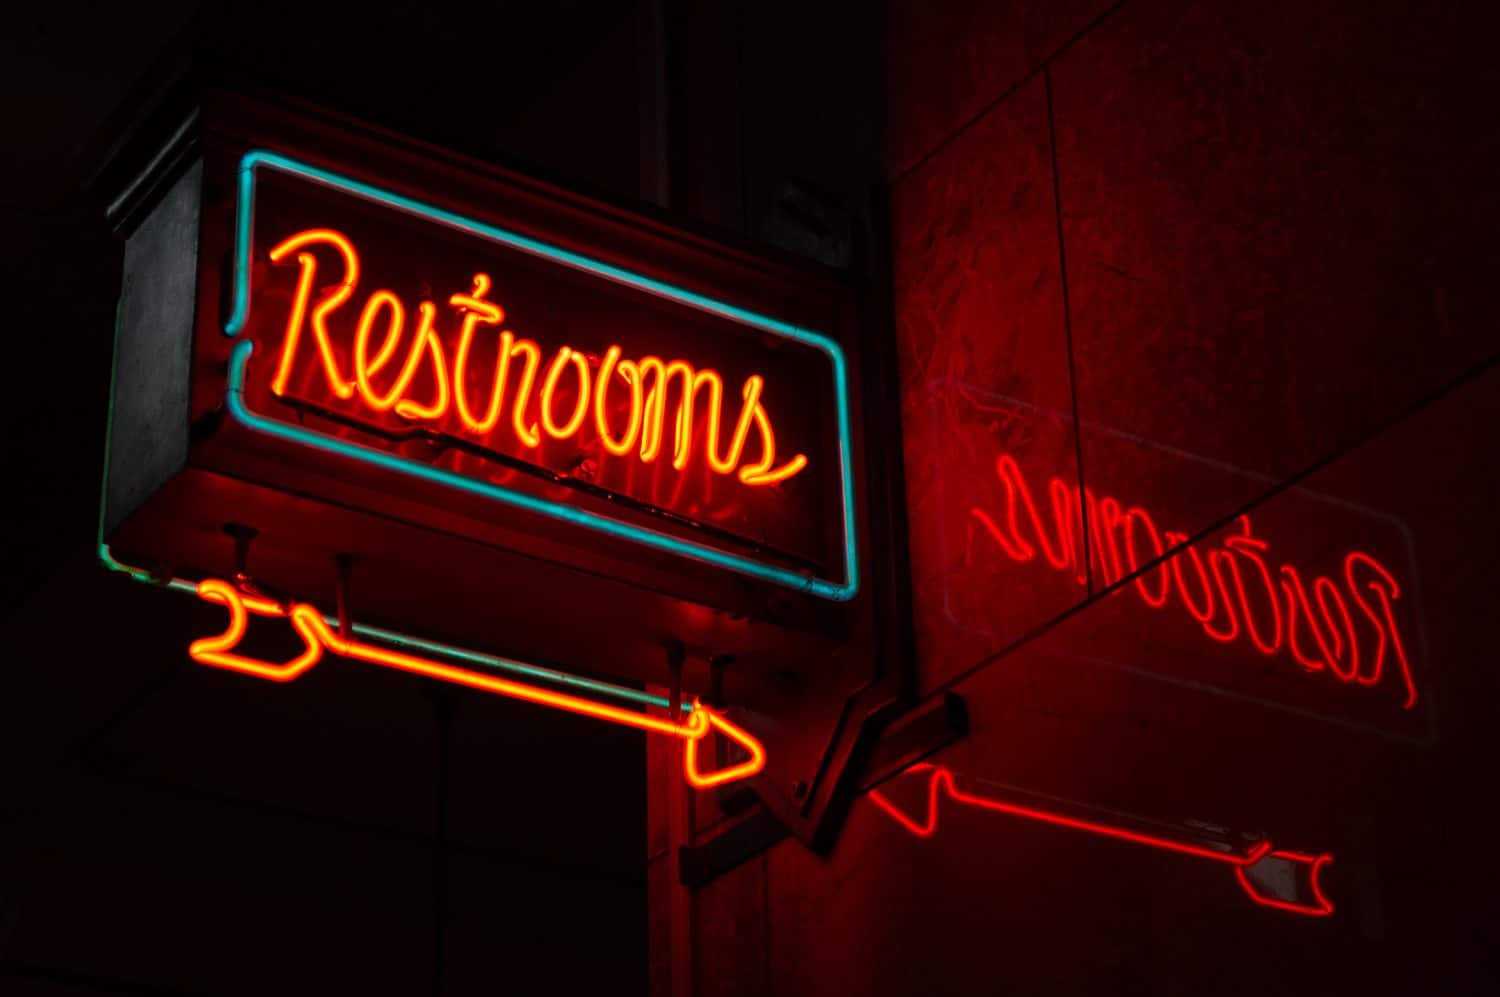 Neon restrooms sign with reflection